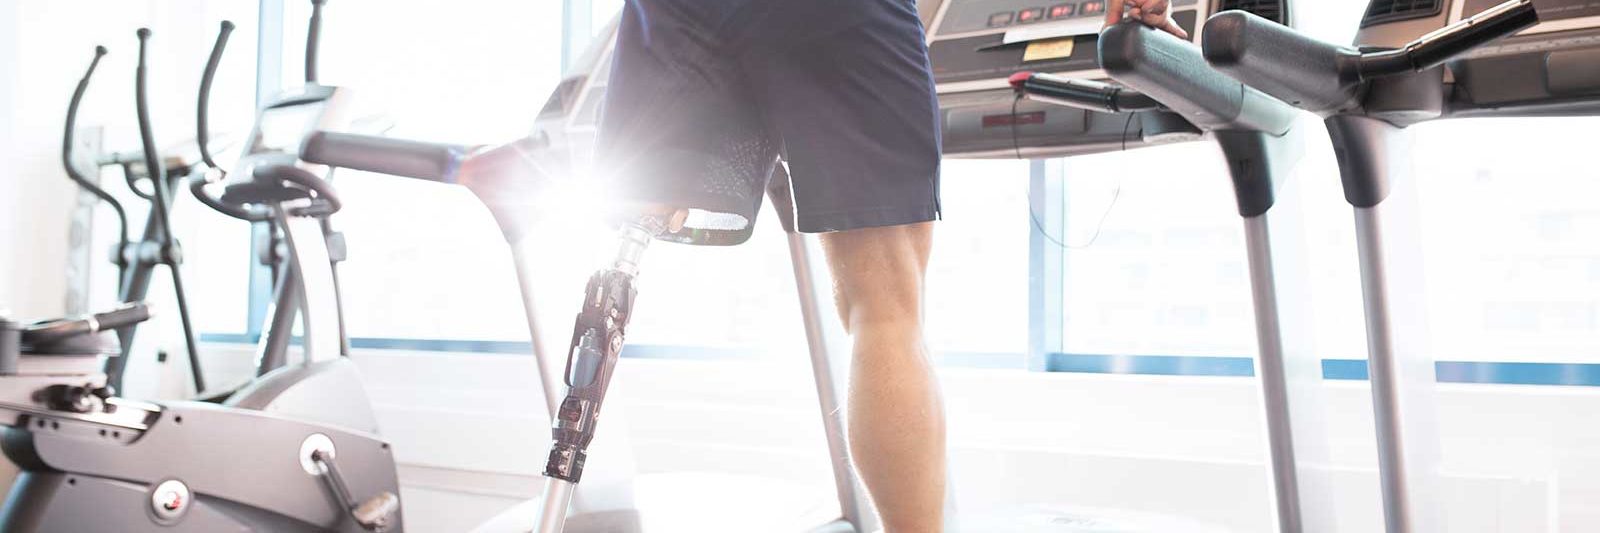 Amputee with Prothetic Leg on Treadmill